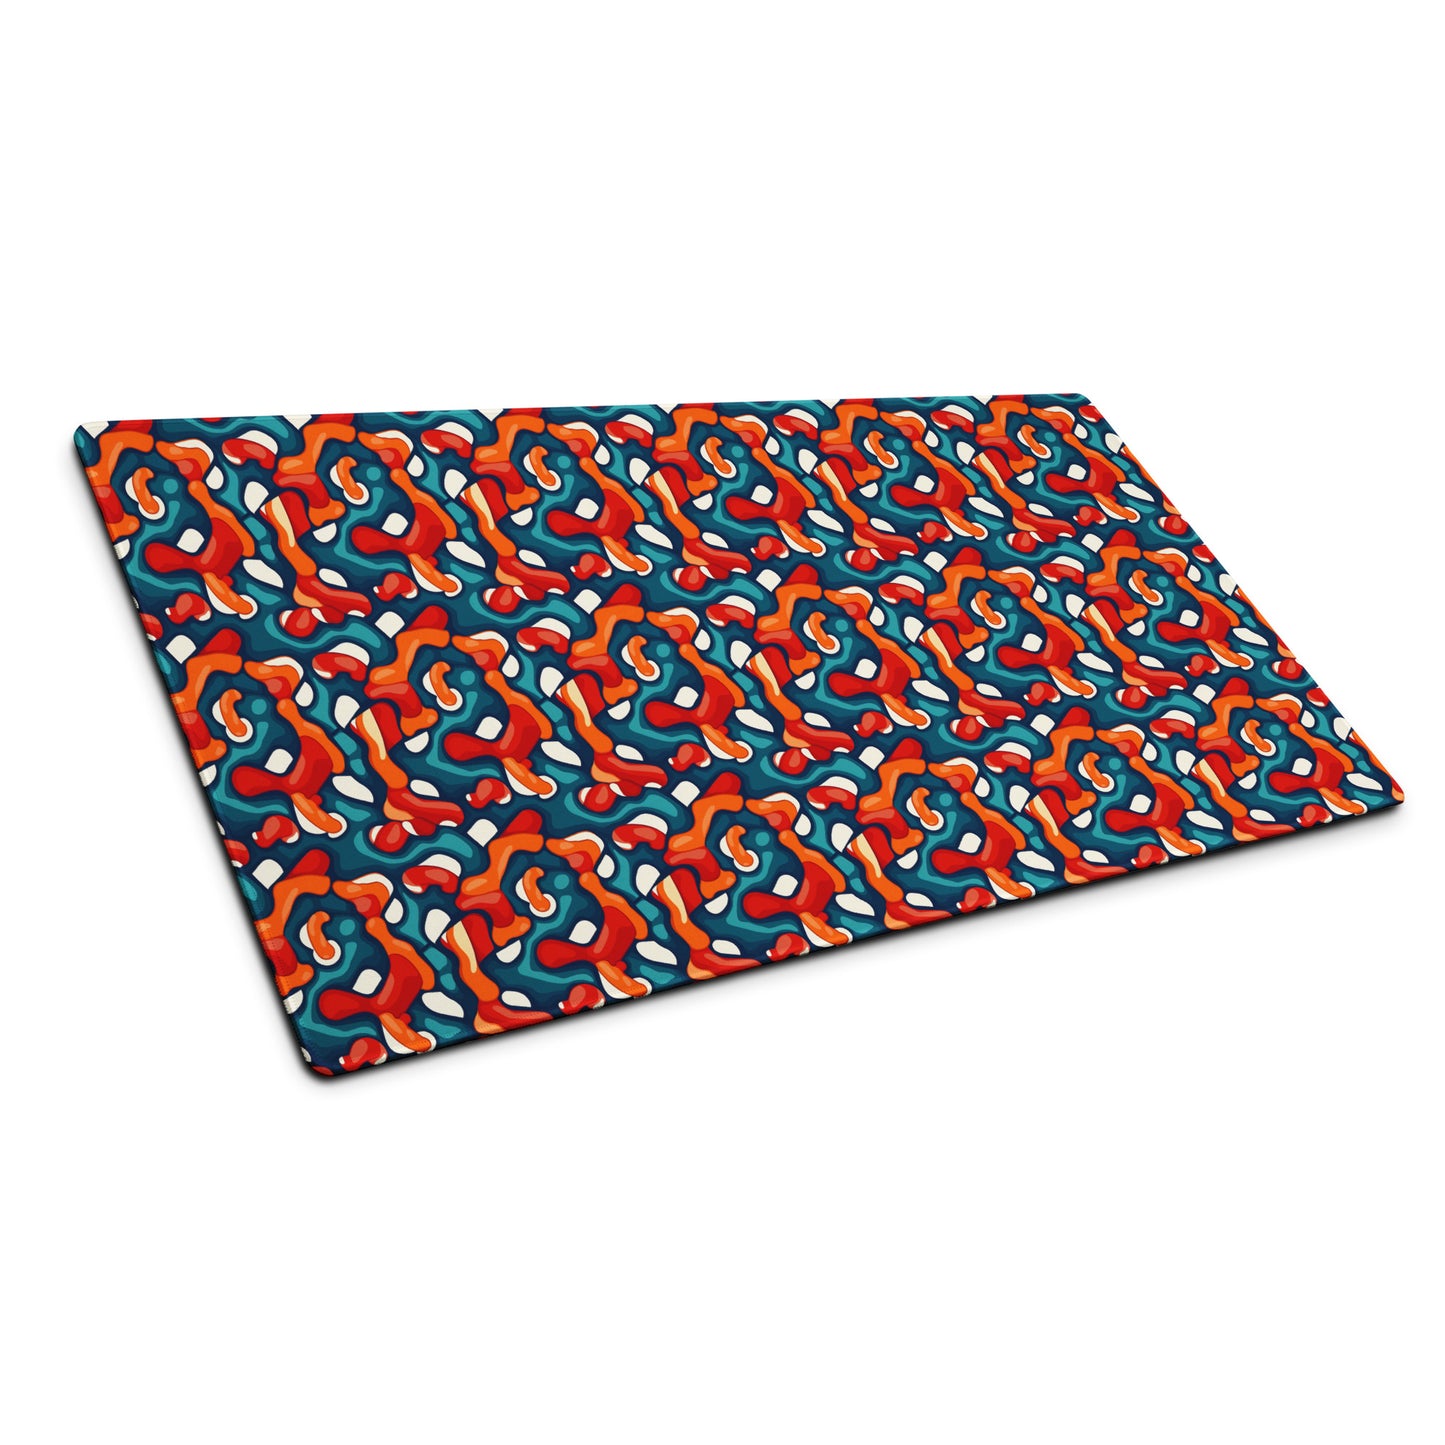 A 36" x 18" desk pad with abstract line art on it shown at an angle. Red, Teal and Orange in color.